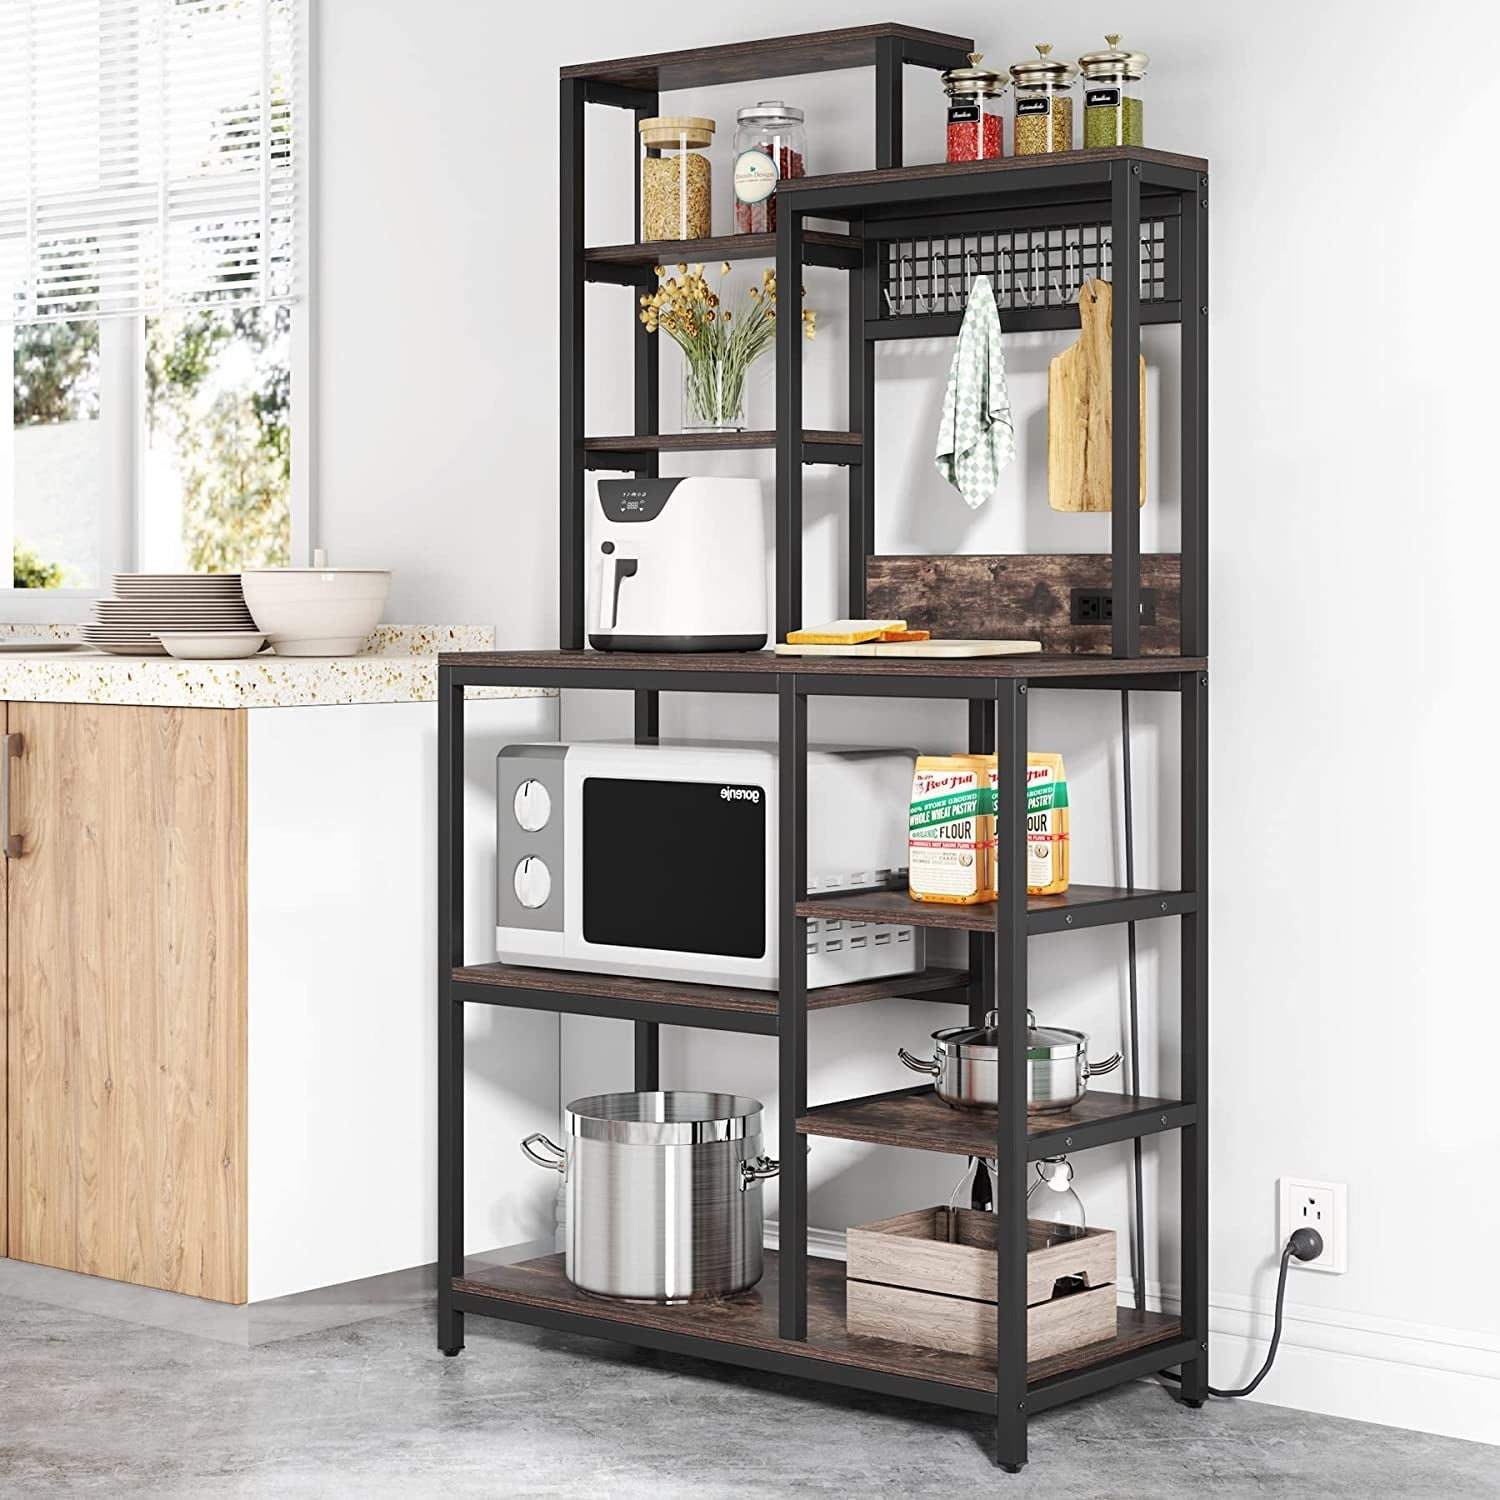 https://ak1.ostkcdn.com/images/products/is/images/direct/395bee60fab573ae7f03f1870468bbdfd566d195/Bakers-Rack-with-Power-Outlet%2C-9-Tier-Kitchen-Utility-Storage-Shelf-with-8-S-Hooks%2C-Rustic-Brown.jpg